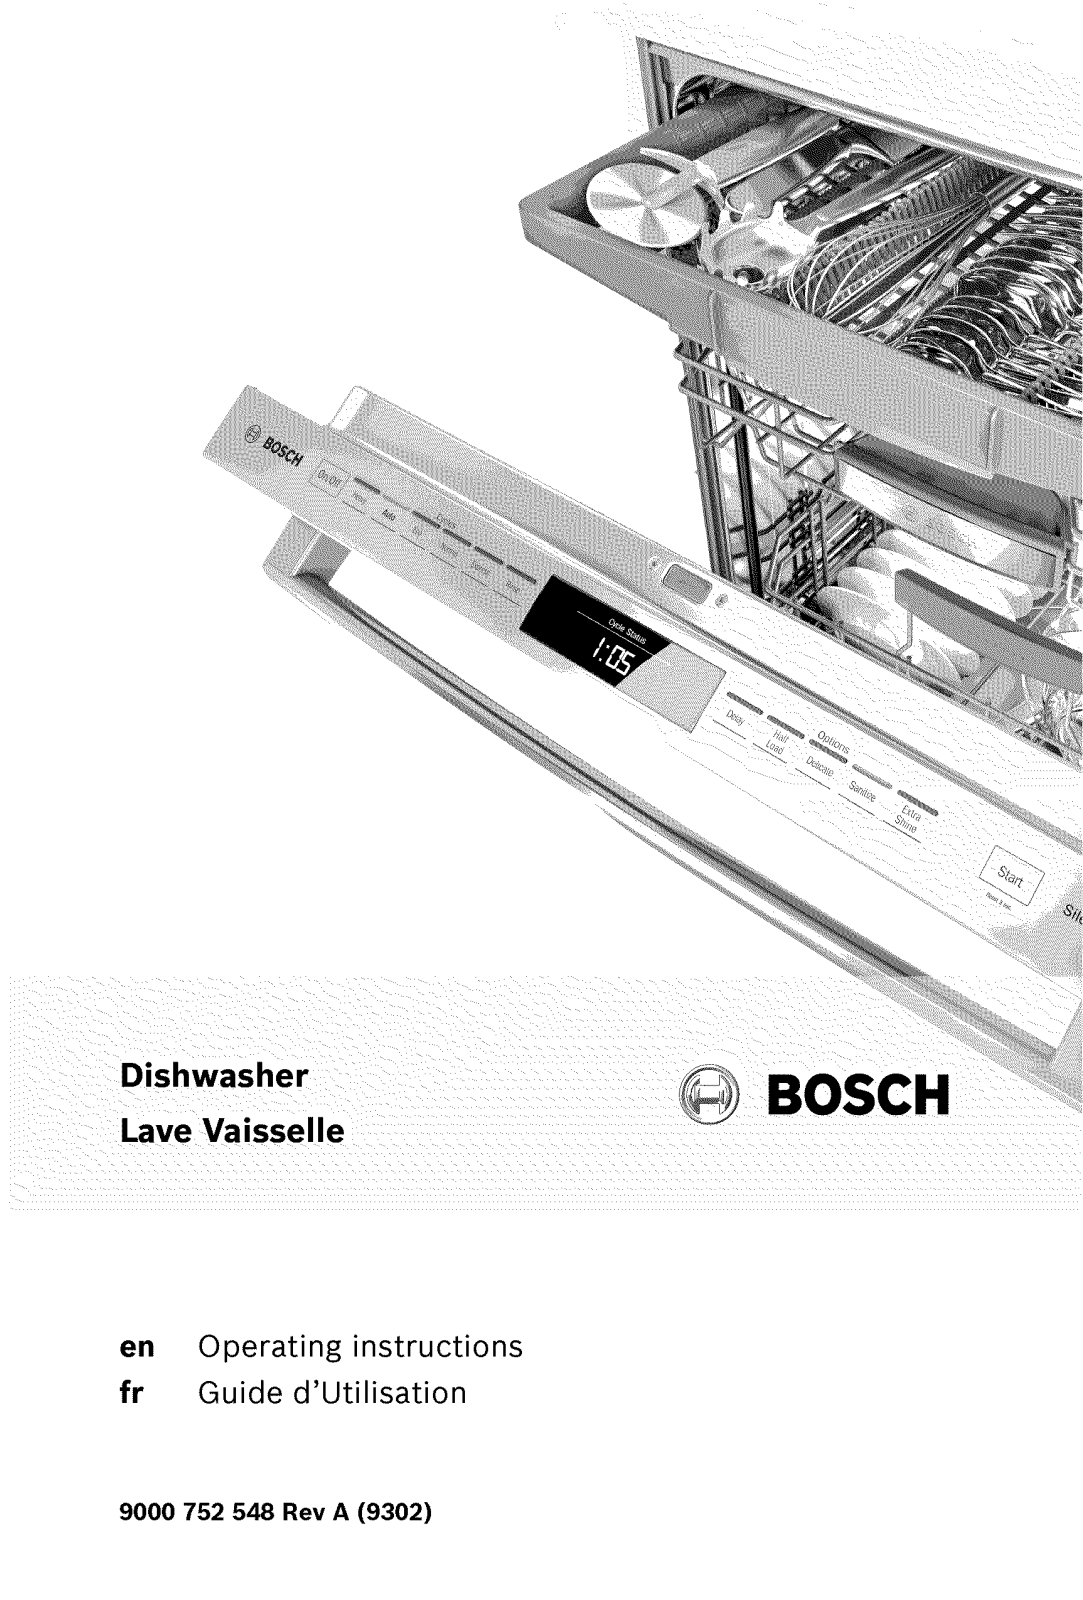 Bosch SHE53TF5UC/01, SHE53TF6UC/02, SHV53T53UC/01, SHV53T53UC/02, SHX53T55UC/01 Owner’s Manual